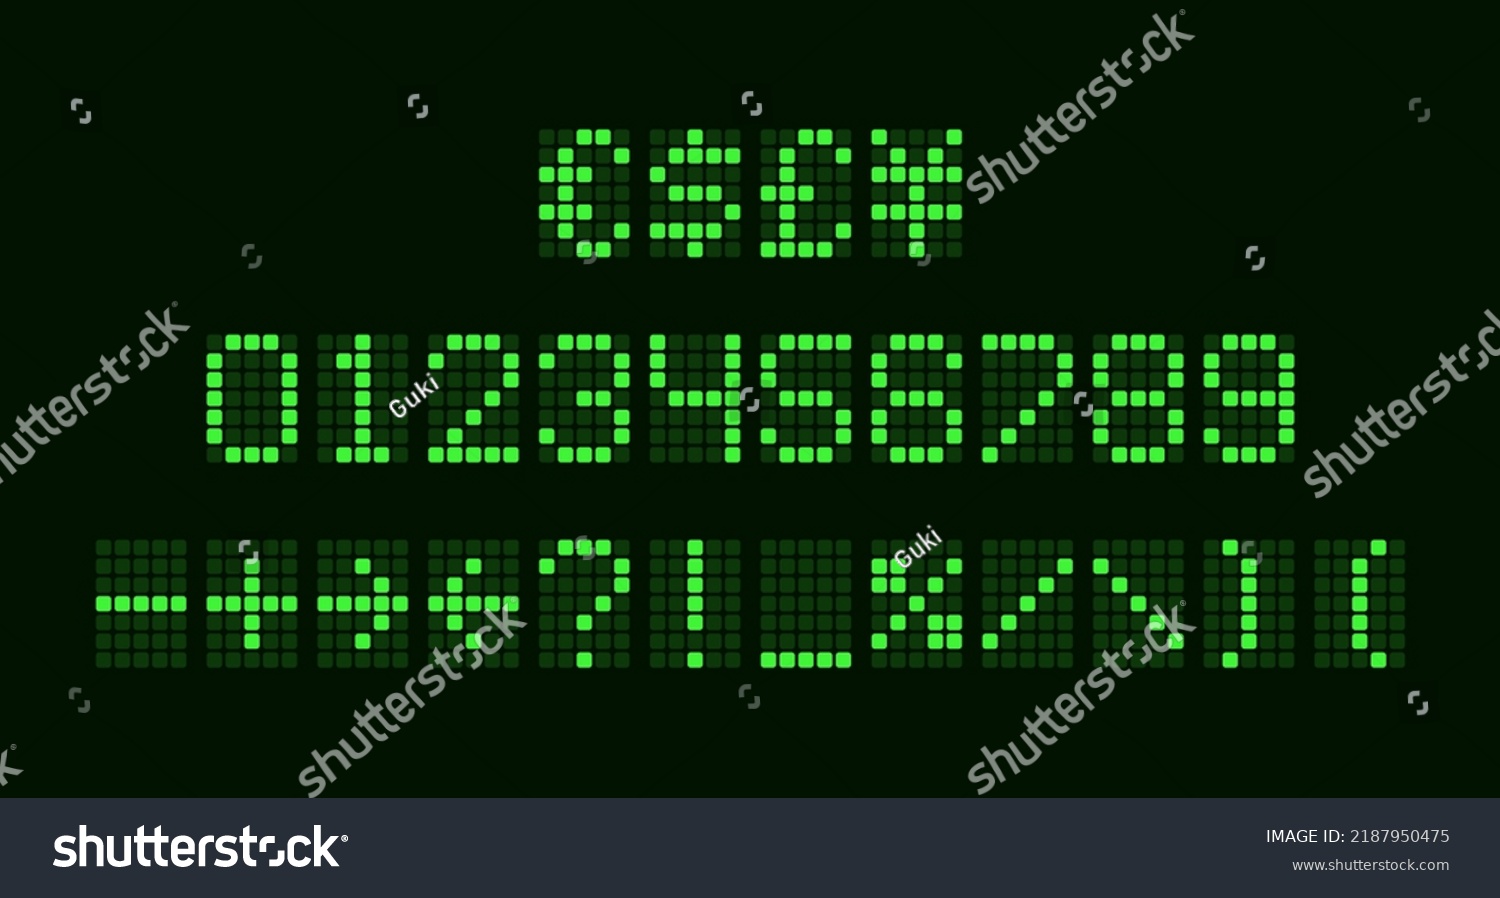 SVG of Vector exchange money rate green screenboard. Sport billboard score. Neon led display typeface mockup. Web airport arrival panel. Digital numbers and signs. Financial pixel icon set. Binary font svg